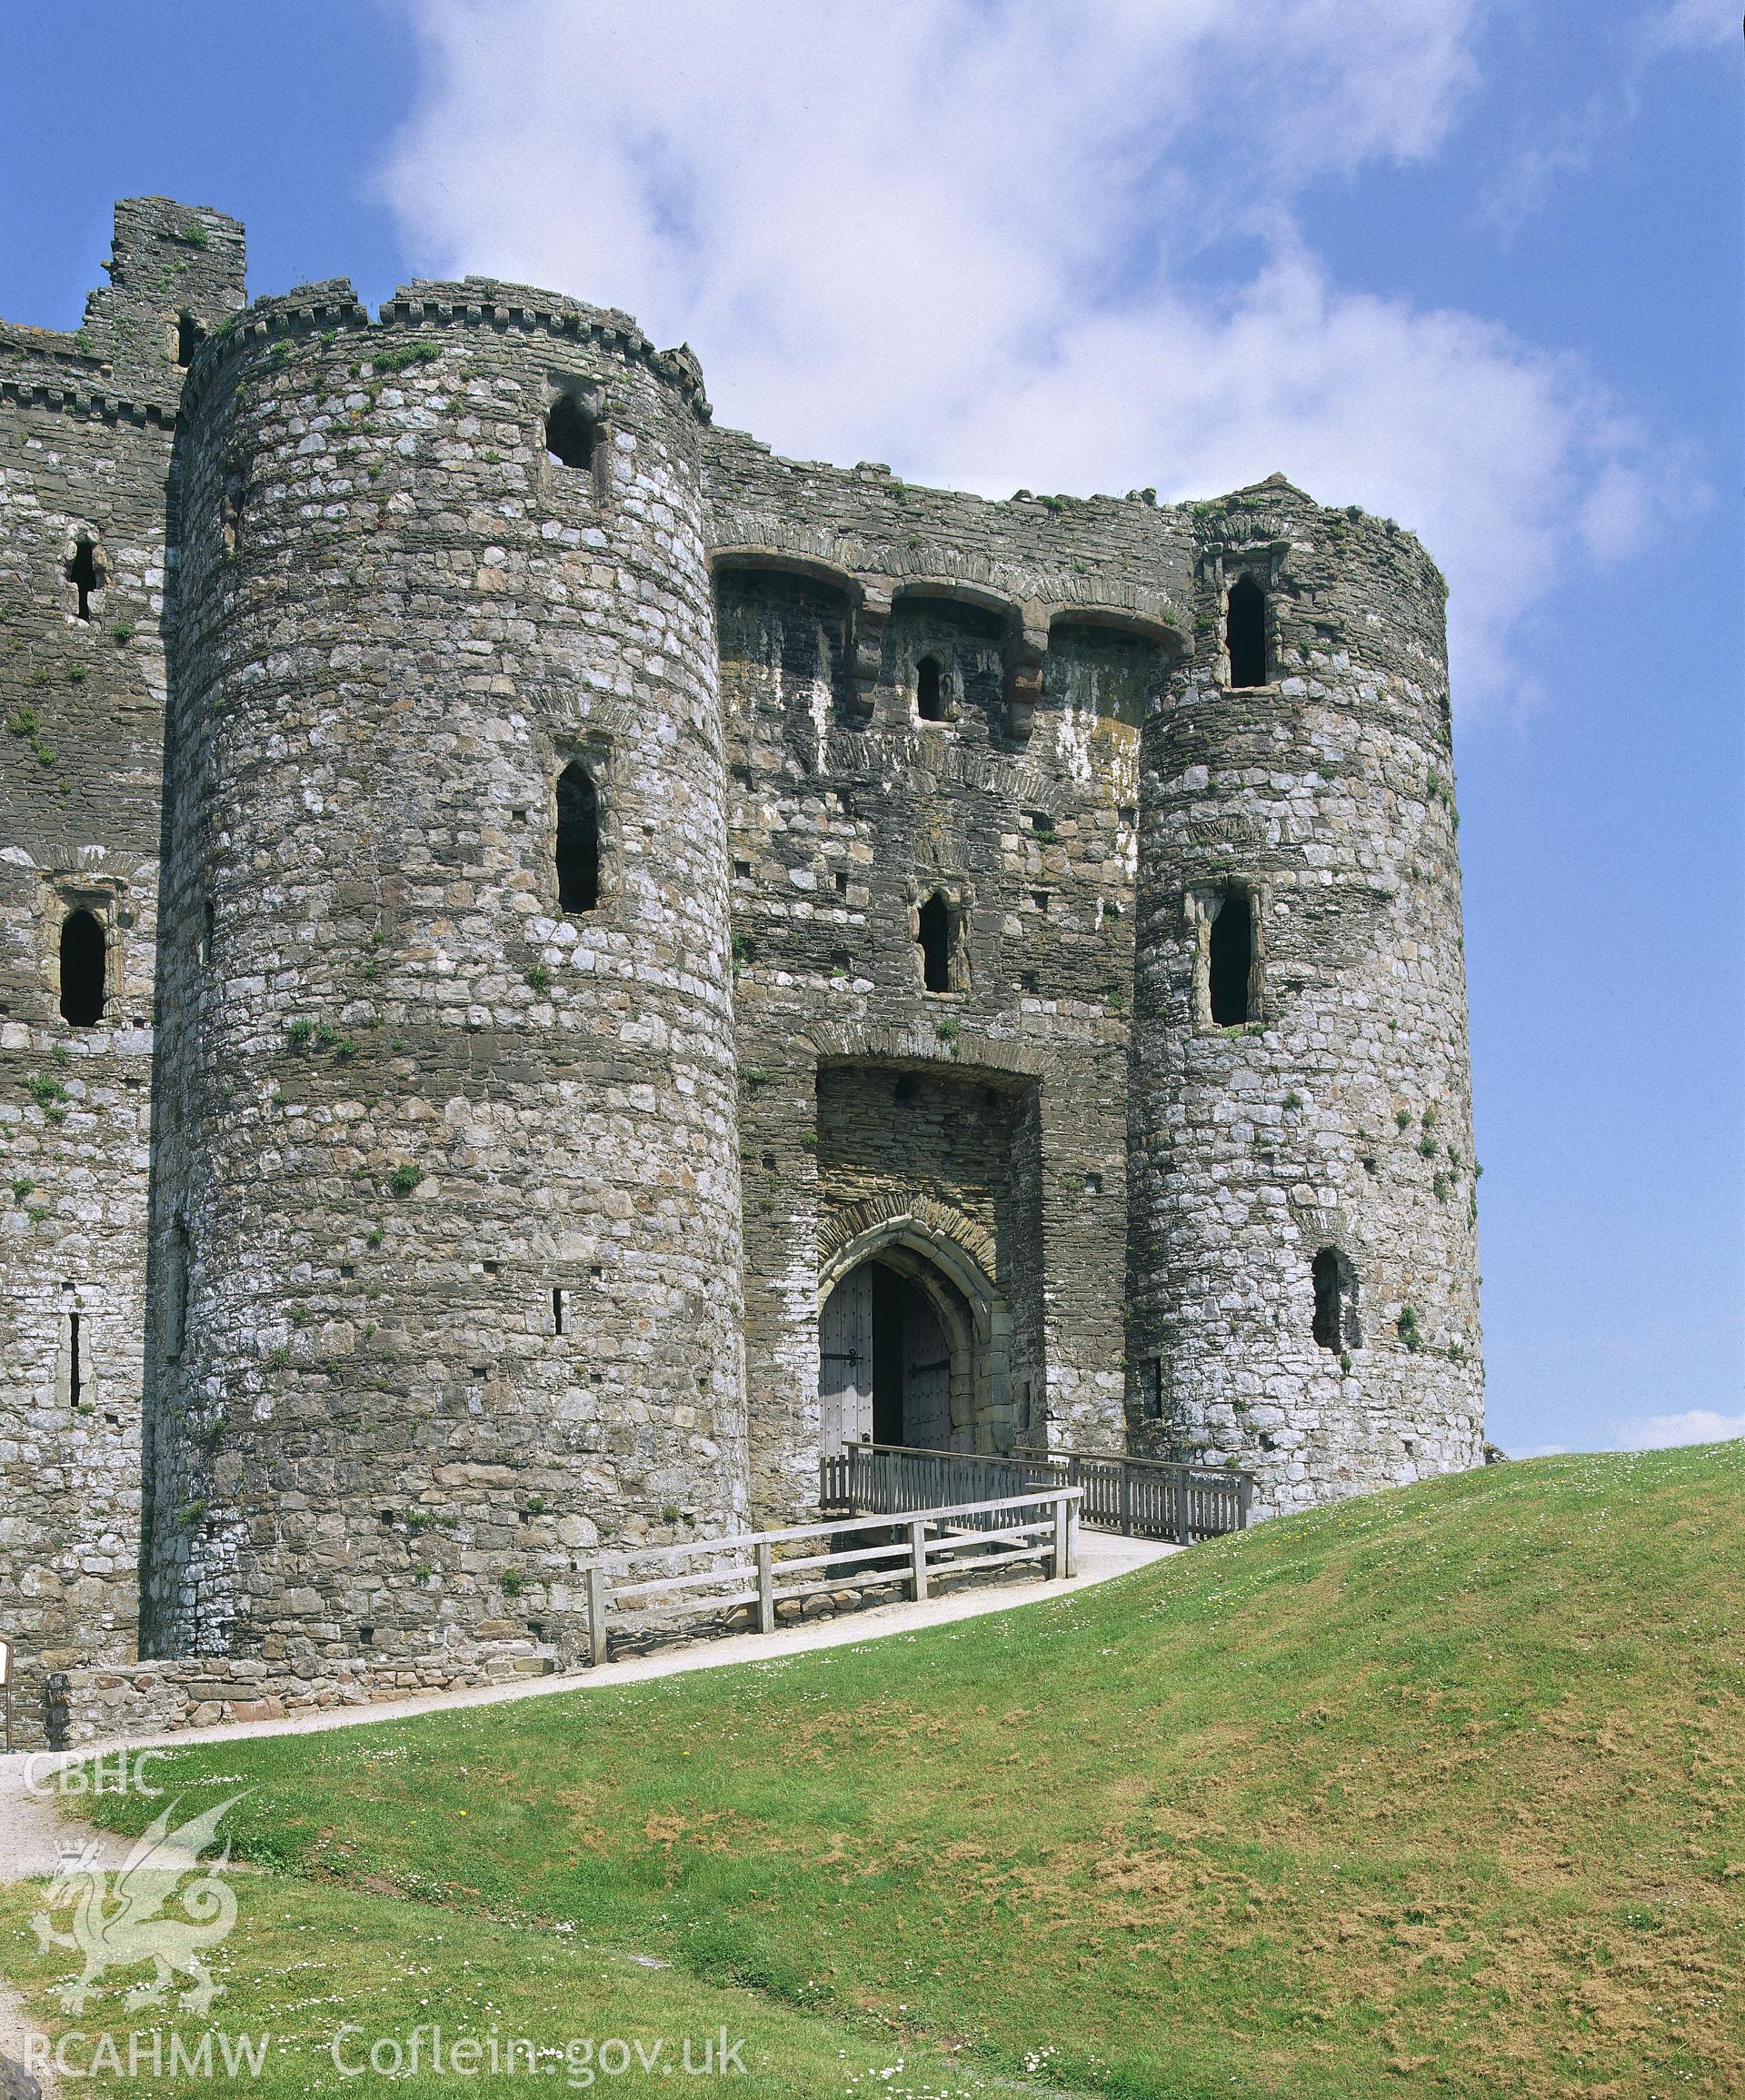 RCAHMW colour transparency showing view of the gatehouse at Kidwelly Castle.